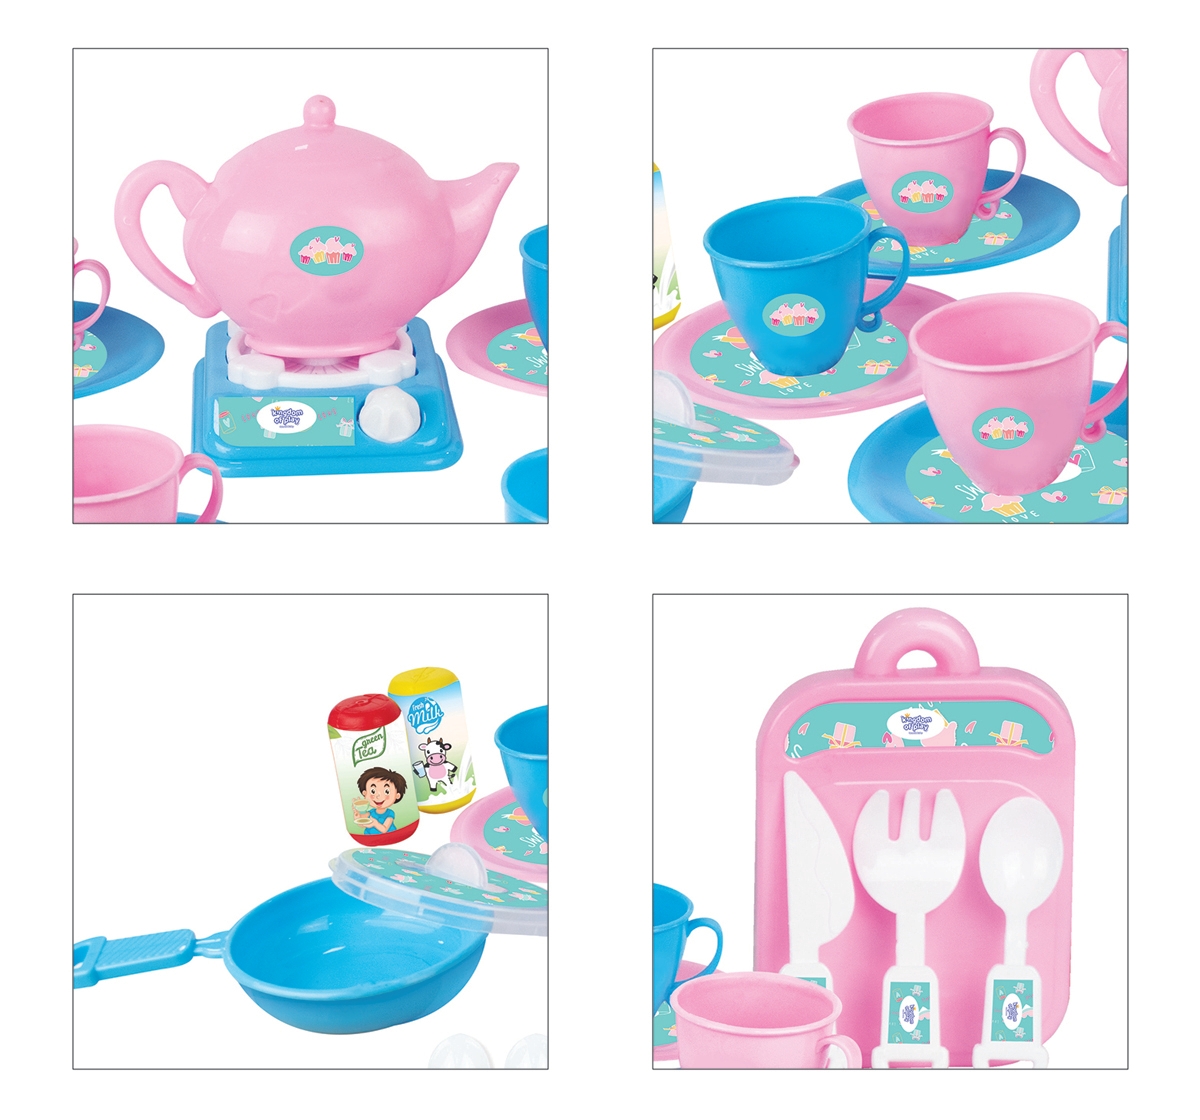 Kingdom Of Play | Kingdom Of Play Tea Party role play kitchen set for kids Multicolor 24M+ 3